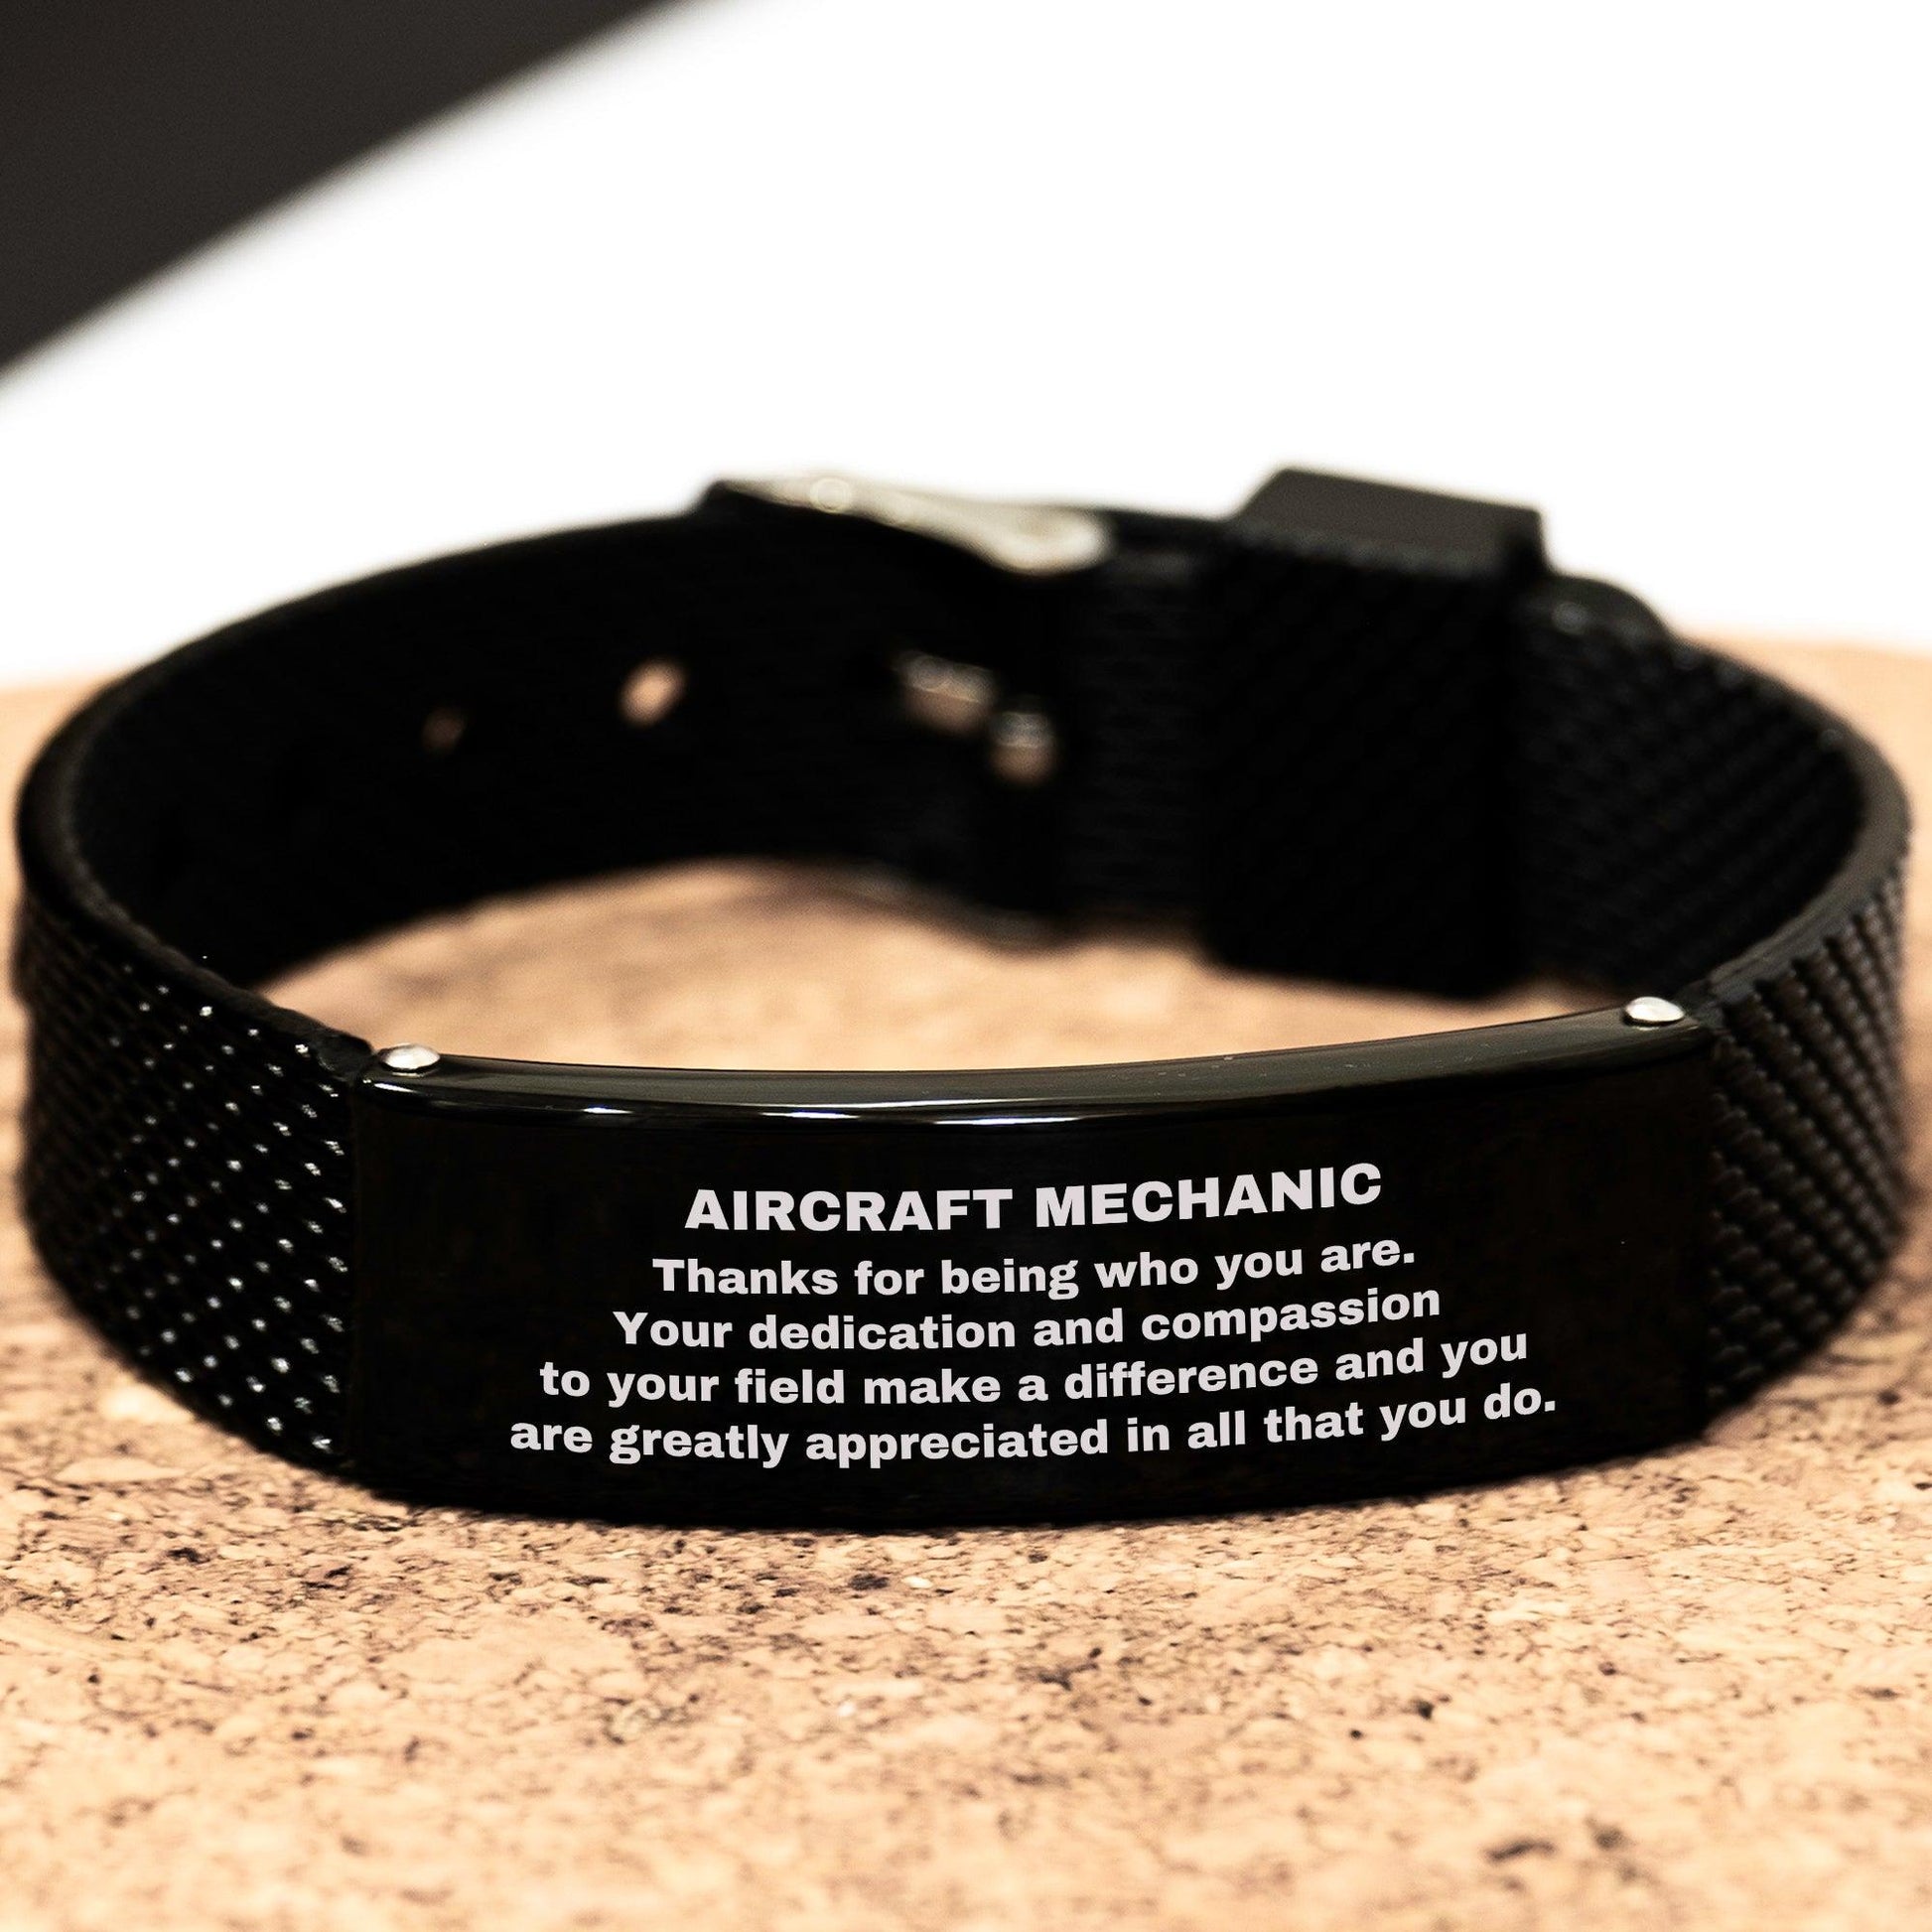 Aircraft Mechanic Black Shark Mesh Stainless Steel Engraved Bracelet - Thanks for being who you are - Birthday Christmas Jewelry Gifts Coworkers Colleague Boss - Mallard Moon Gift Shop